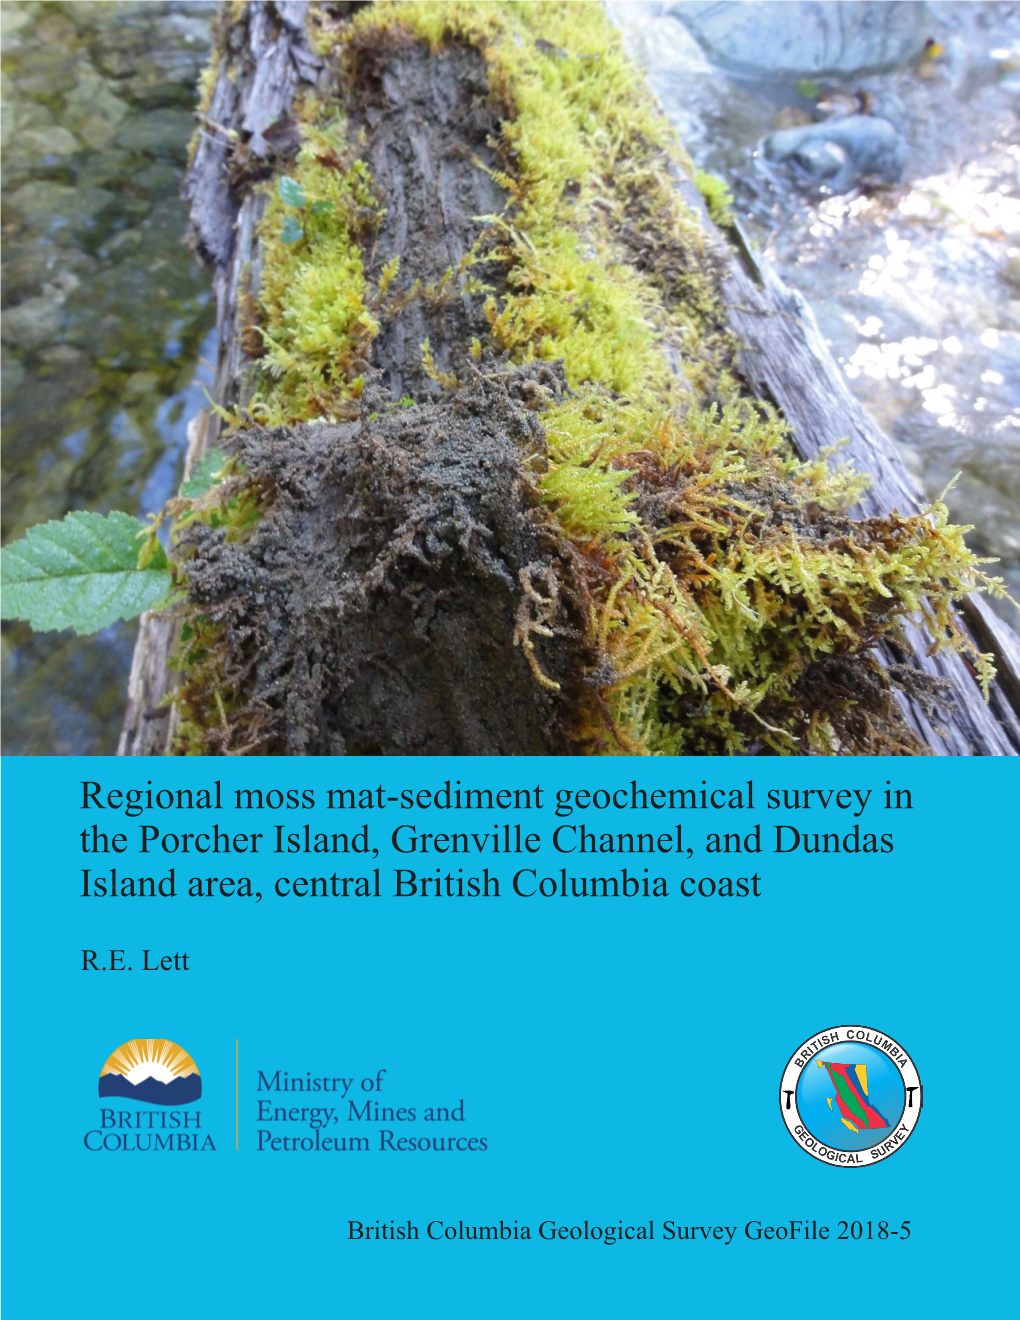 Regional Moss Mat-Sediment Geochemical Survey in the Porcher Island, Grenville Channel, and Dundas Island Area, Central British Columbia Coast